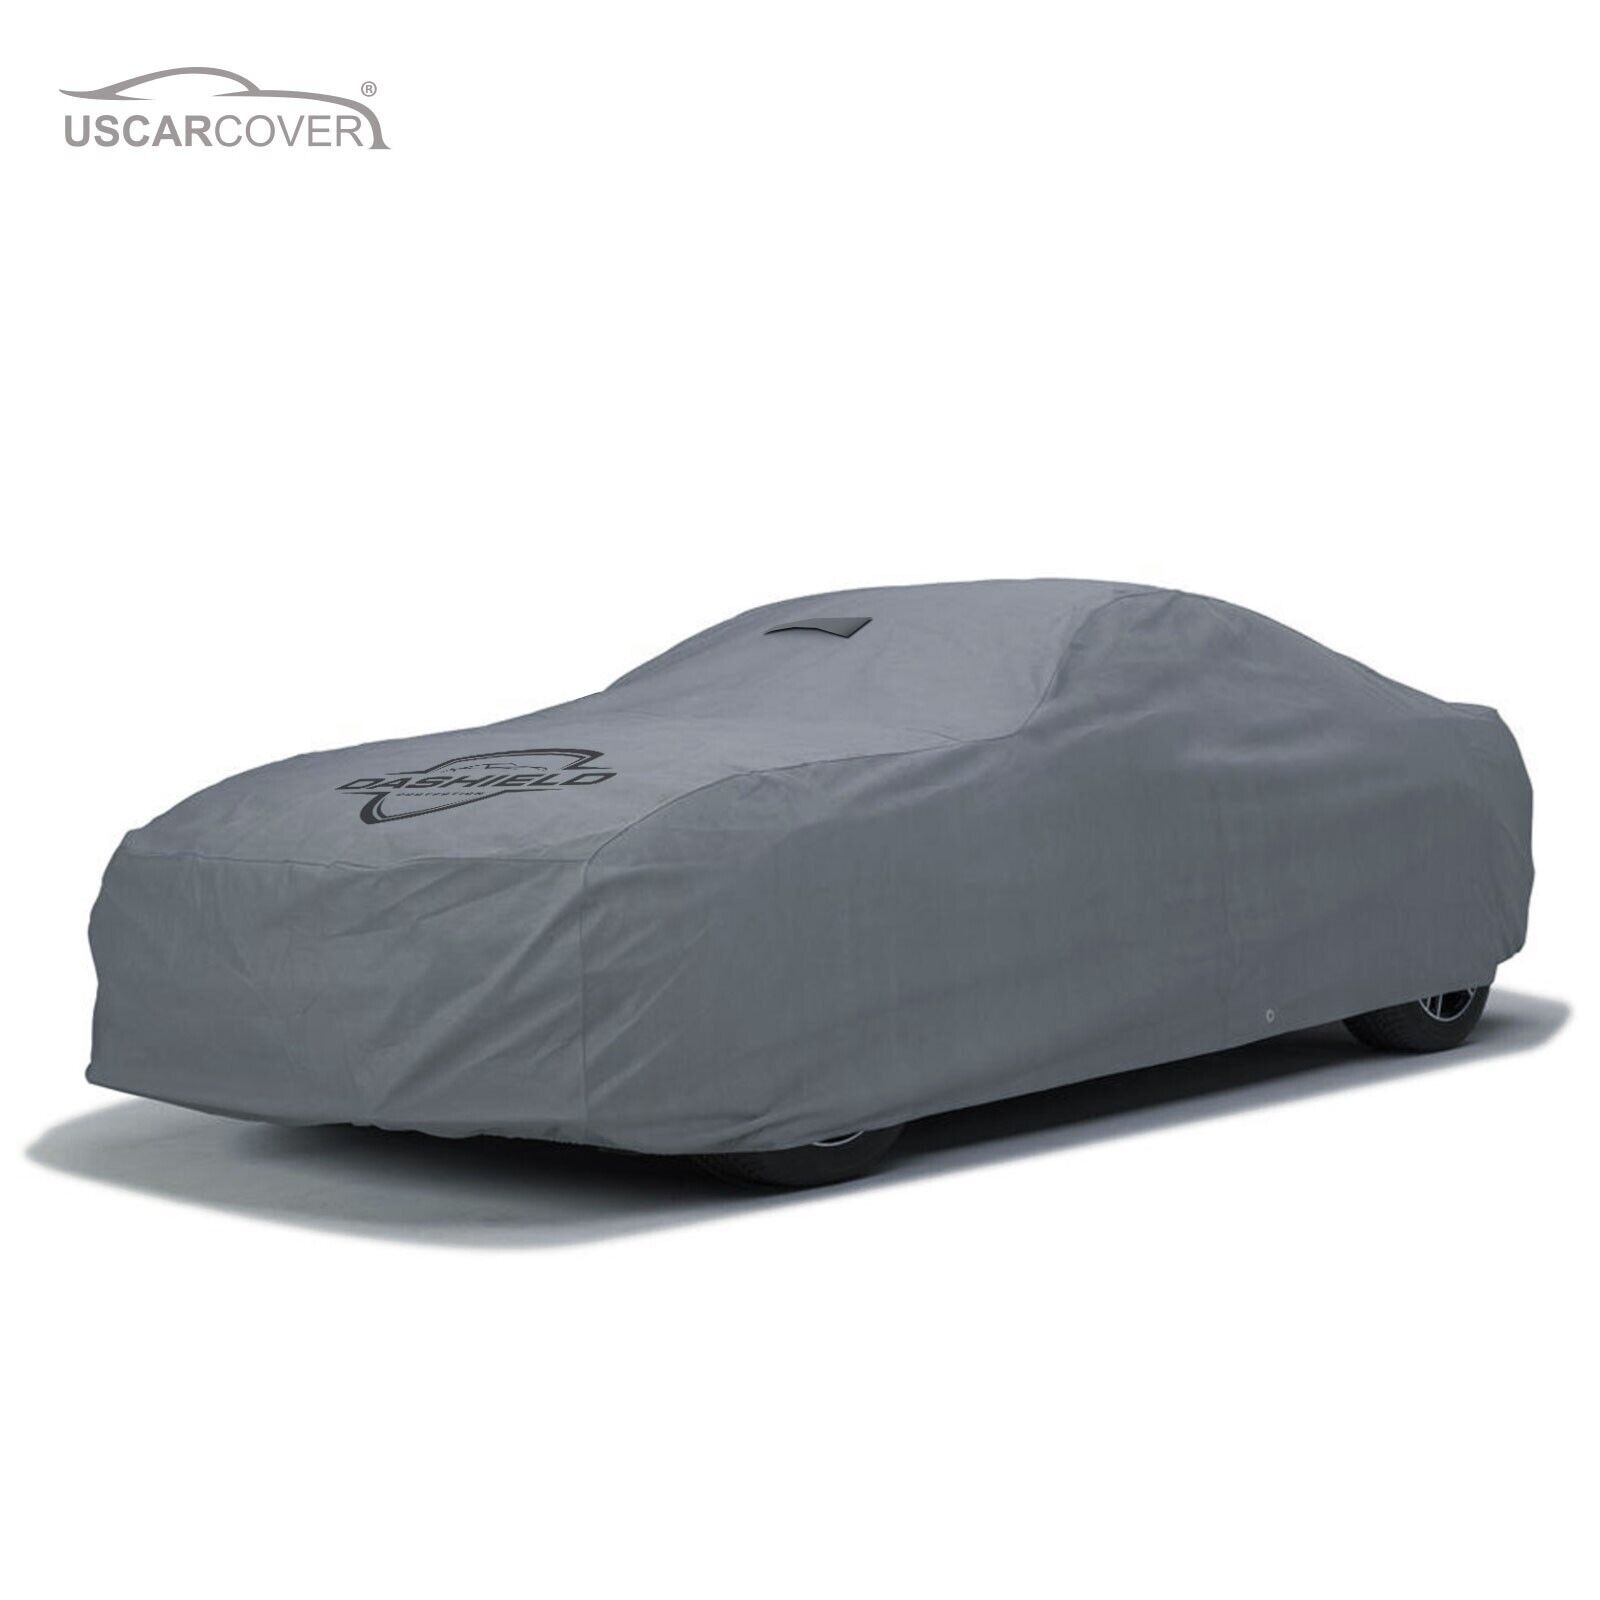 DaShield Ultimum Series Car Cover for Mercedes-Benz CLS63 AMG 2006-2010